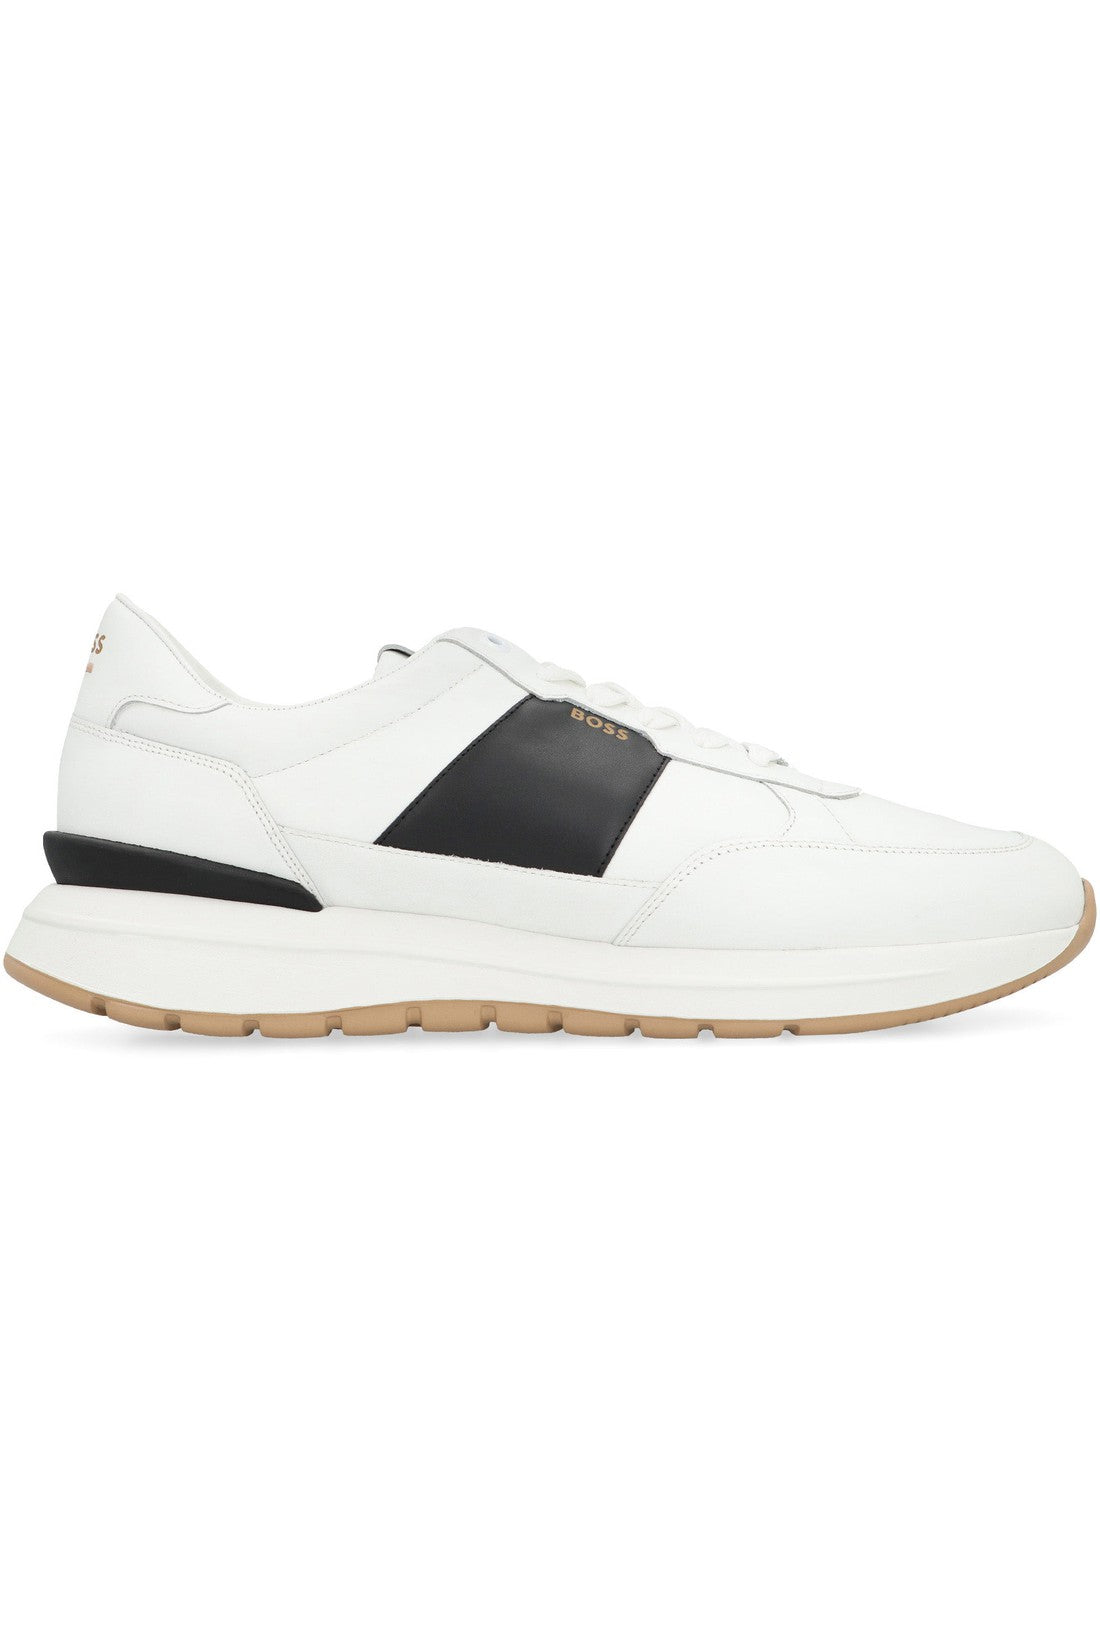 BOSS-OUTLET-SALE-Jace Leather low-top sneakers-ARCHIVIST